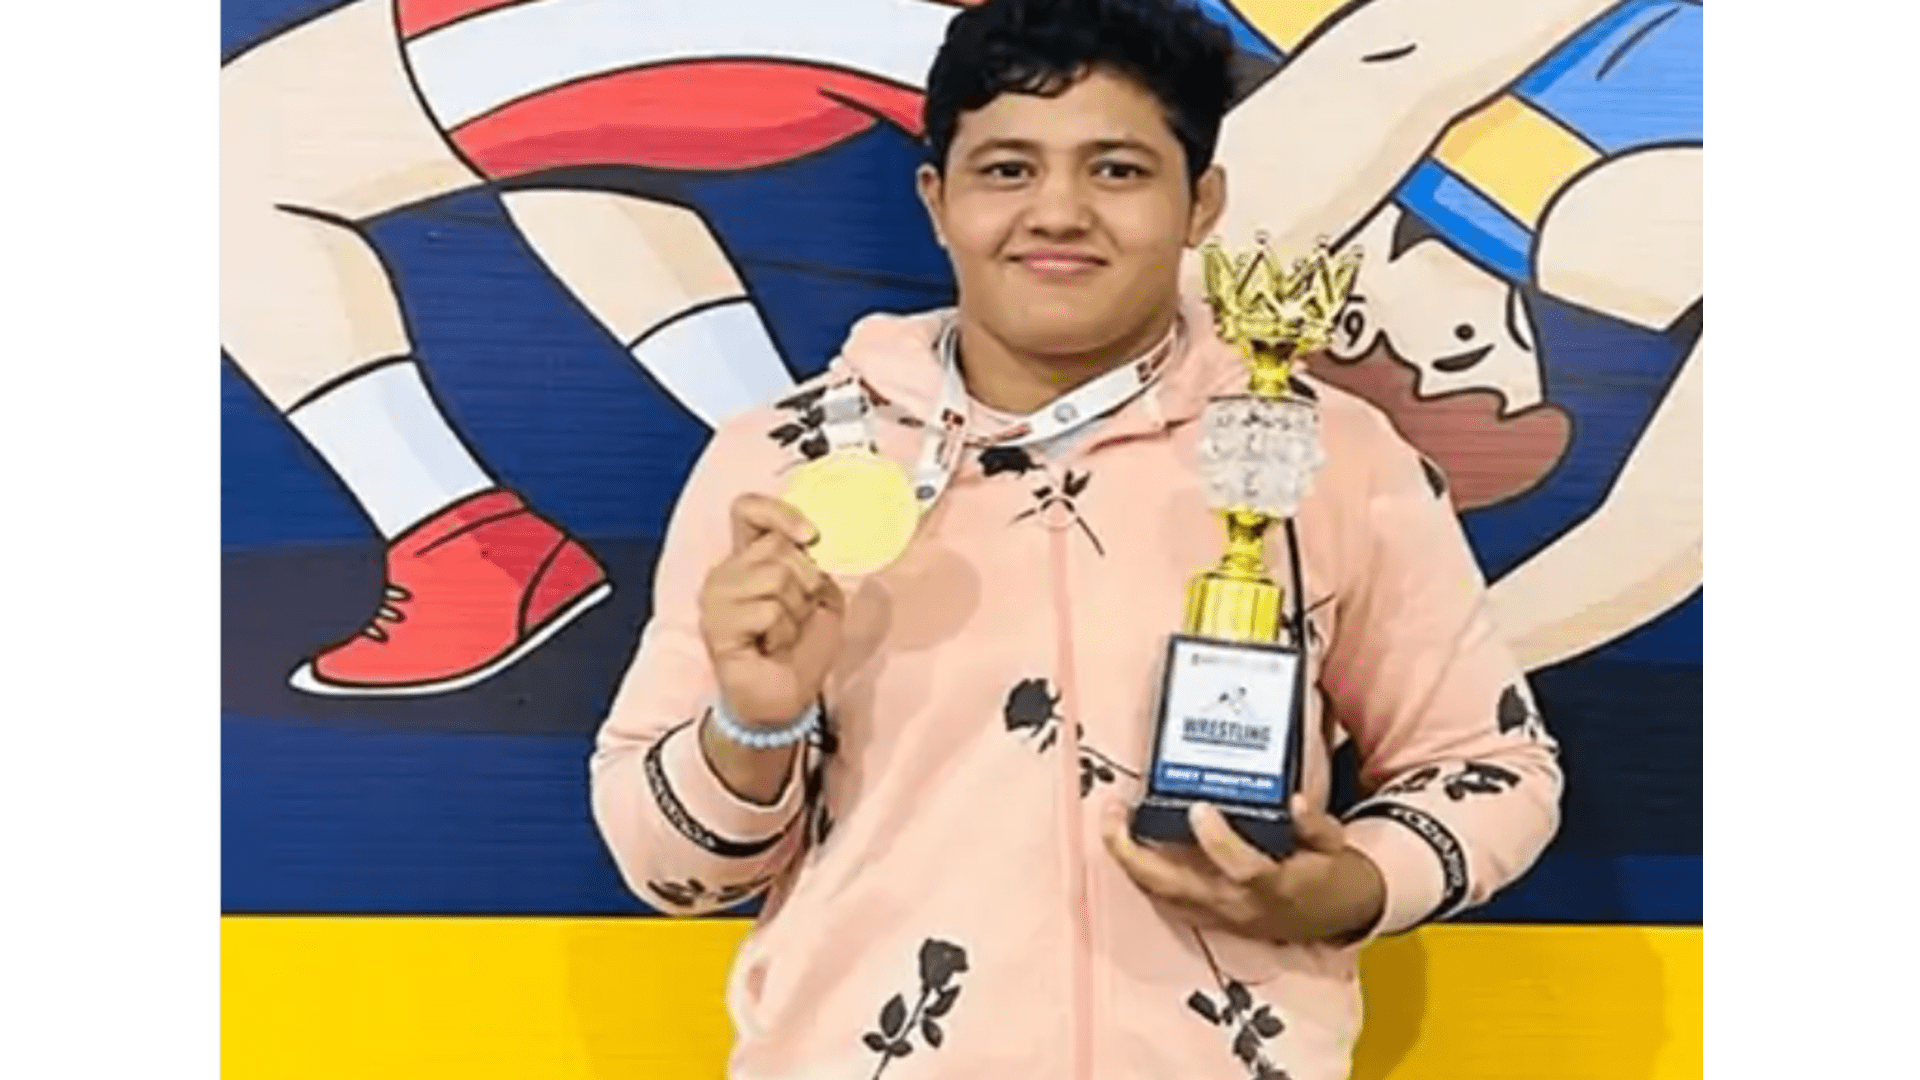 Rohtak's Wrestling Prodigy Ritu Receives Best Wishes from PM Modi Ahead of Olympics